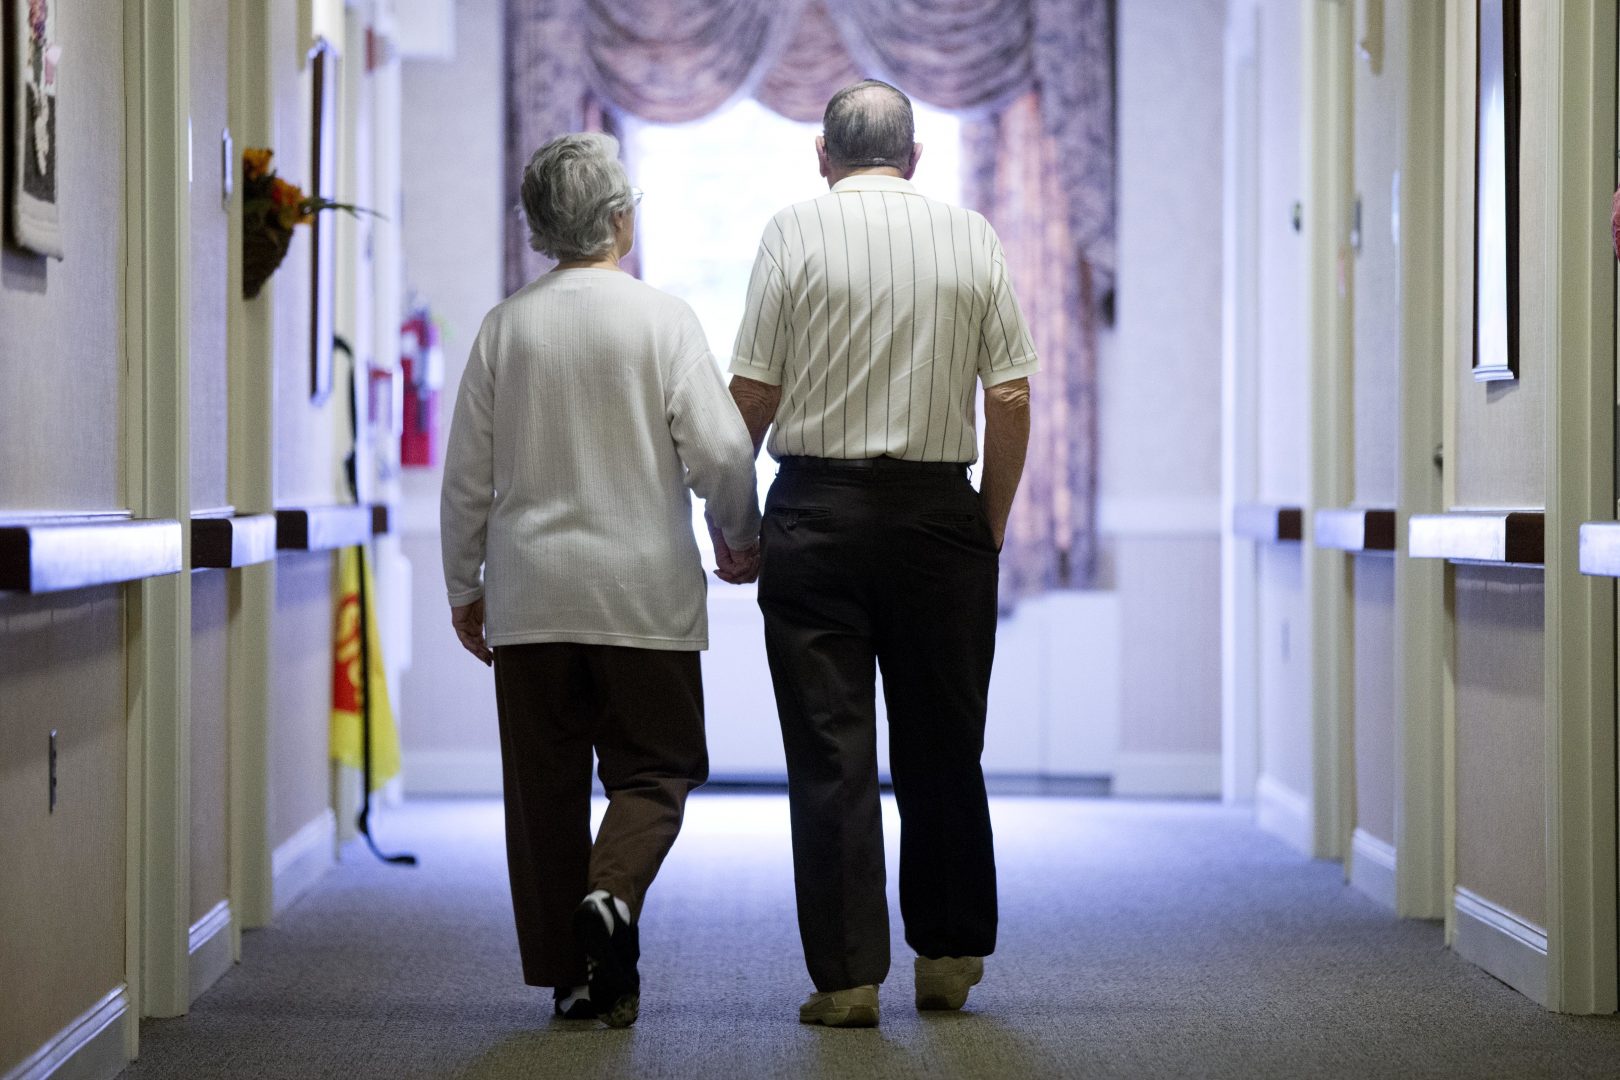 FILE PHOTO: In this Nov. 6, 2015 file photo, an elderly couple walks down a hall of a nursing home in Easton, Pa.